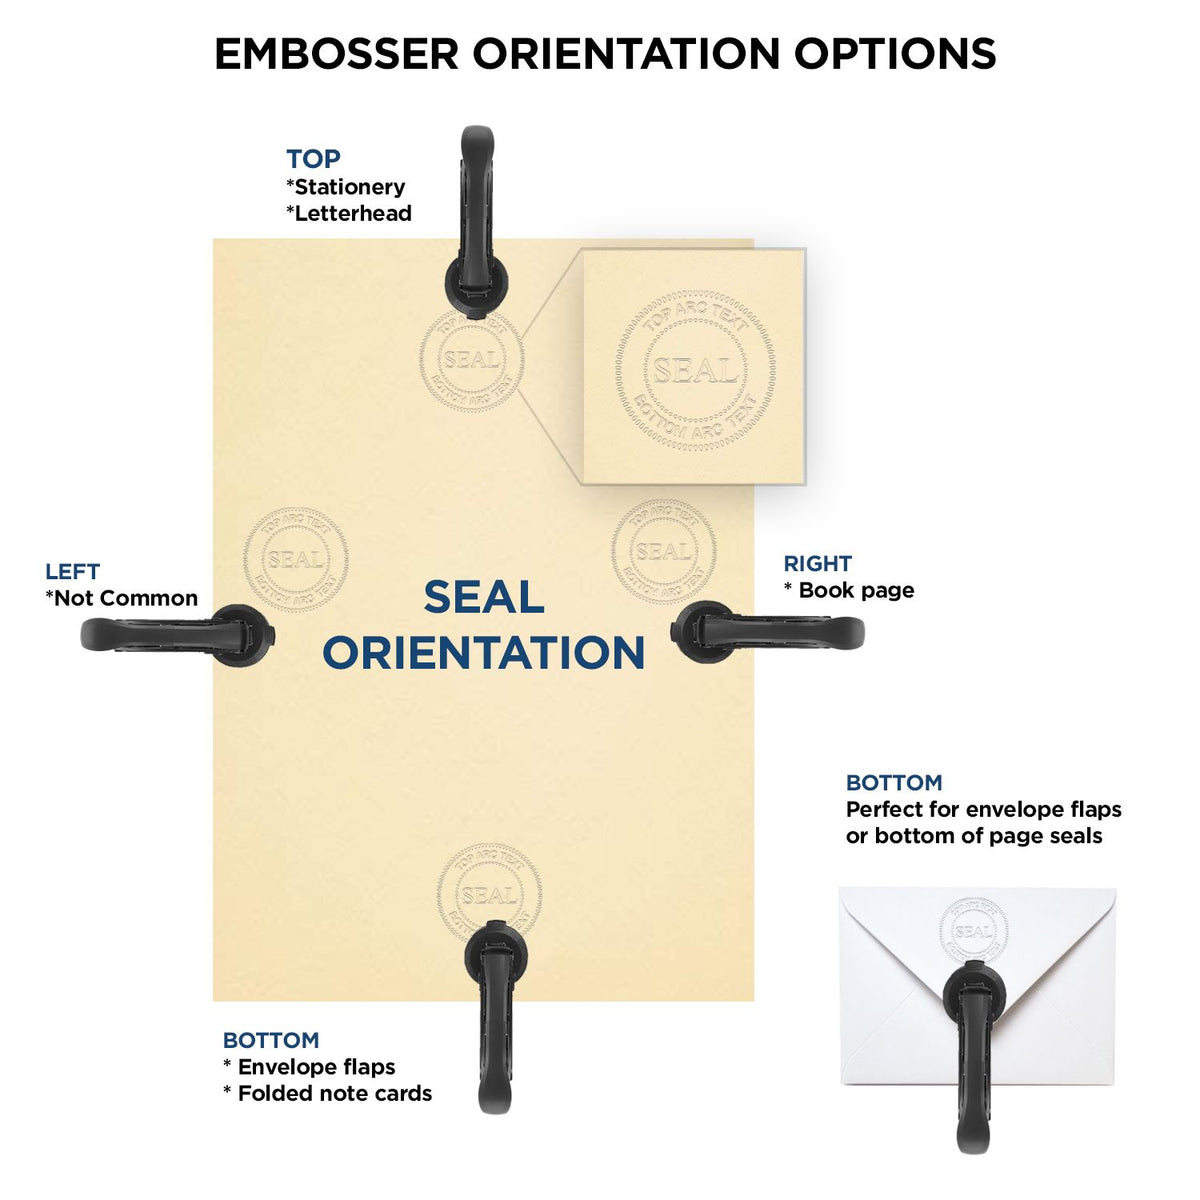 An infographic for the Handheld Alabama Land Surveyor Seal showing embosser orientation, this is showing examples of a top, bottom, right and left insert.